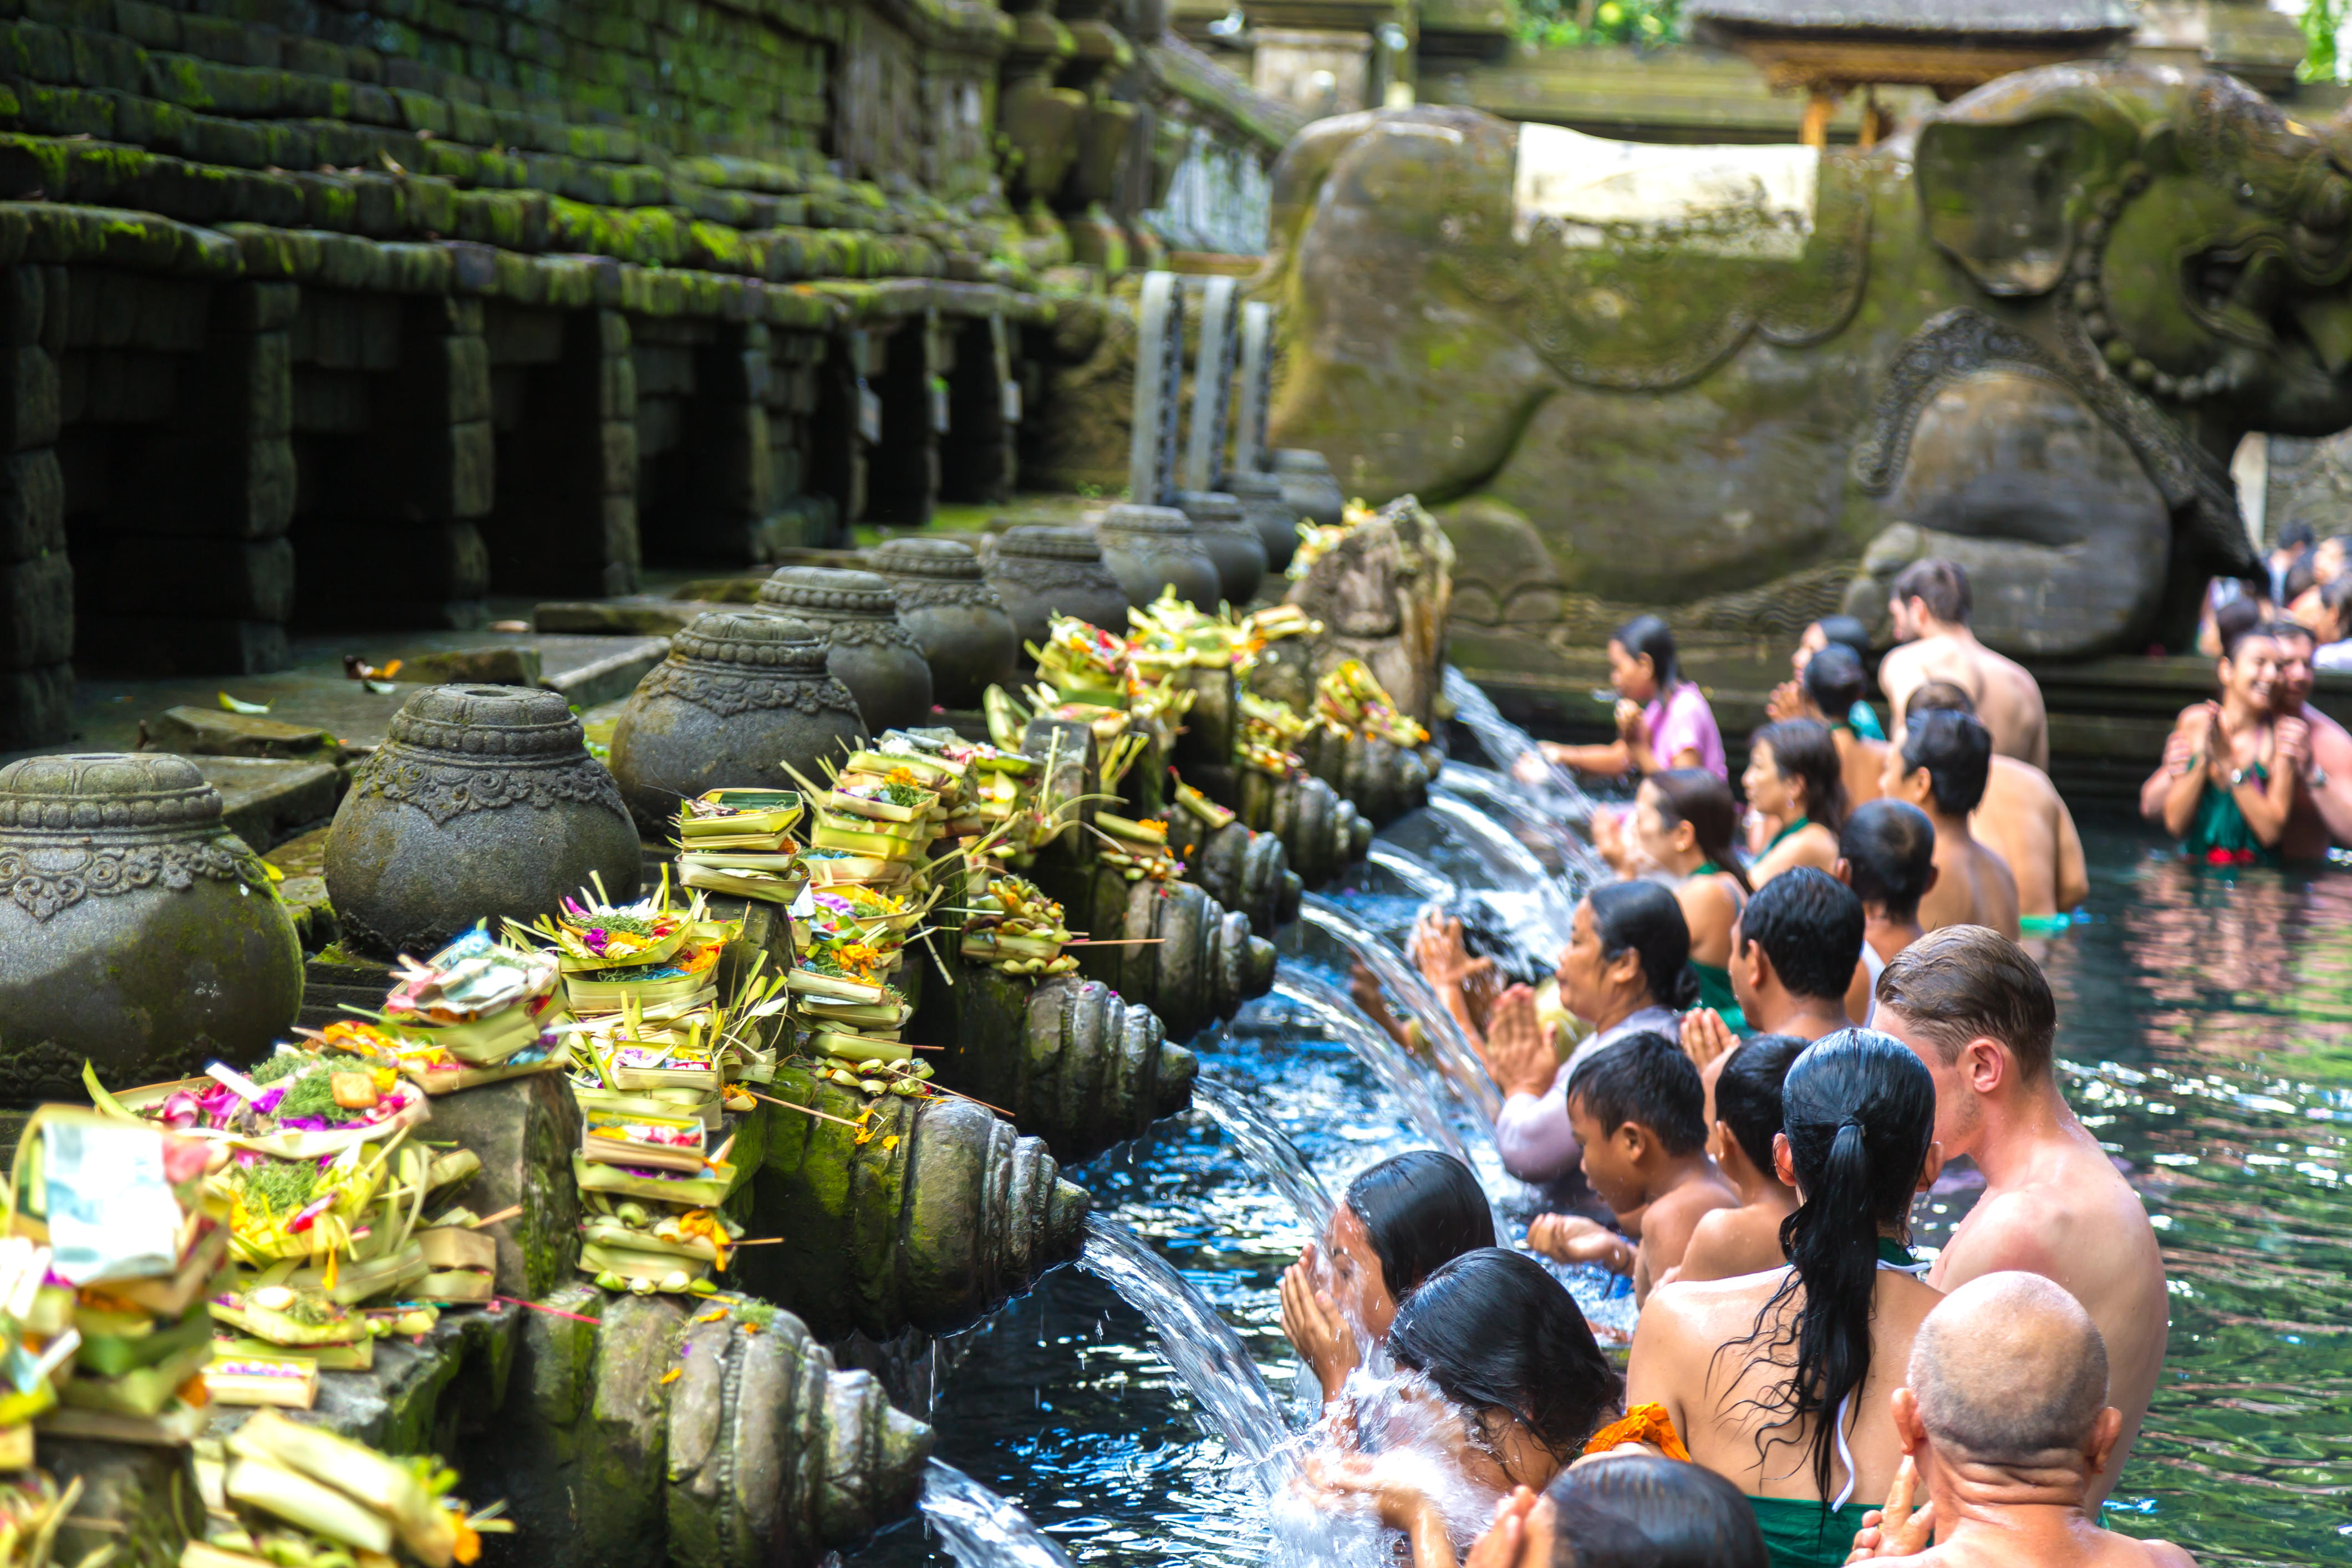 Holy Spring bathing temple